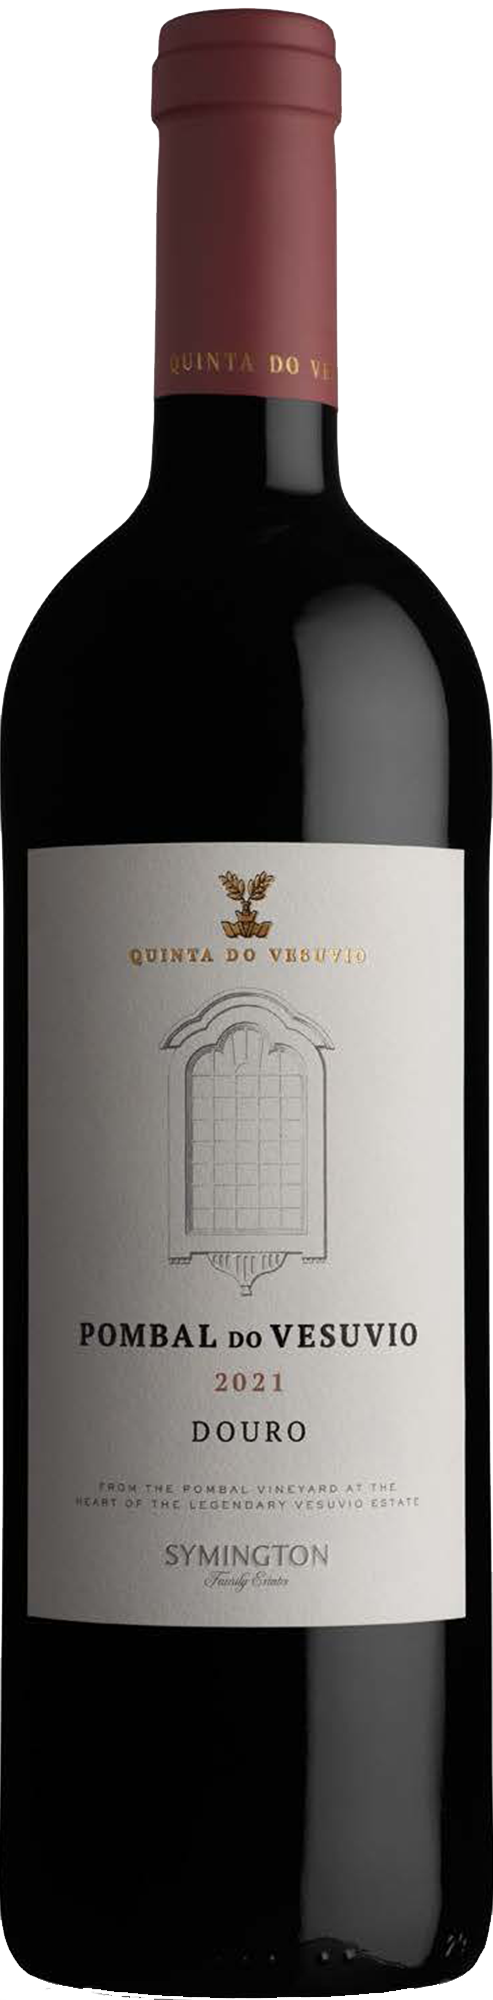 Product Image for POMBAL DO VESUVIO DOURO RED 2021